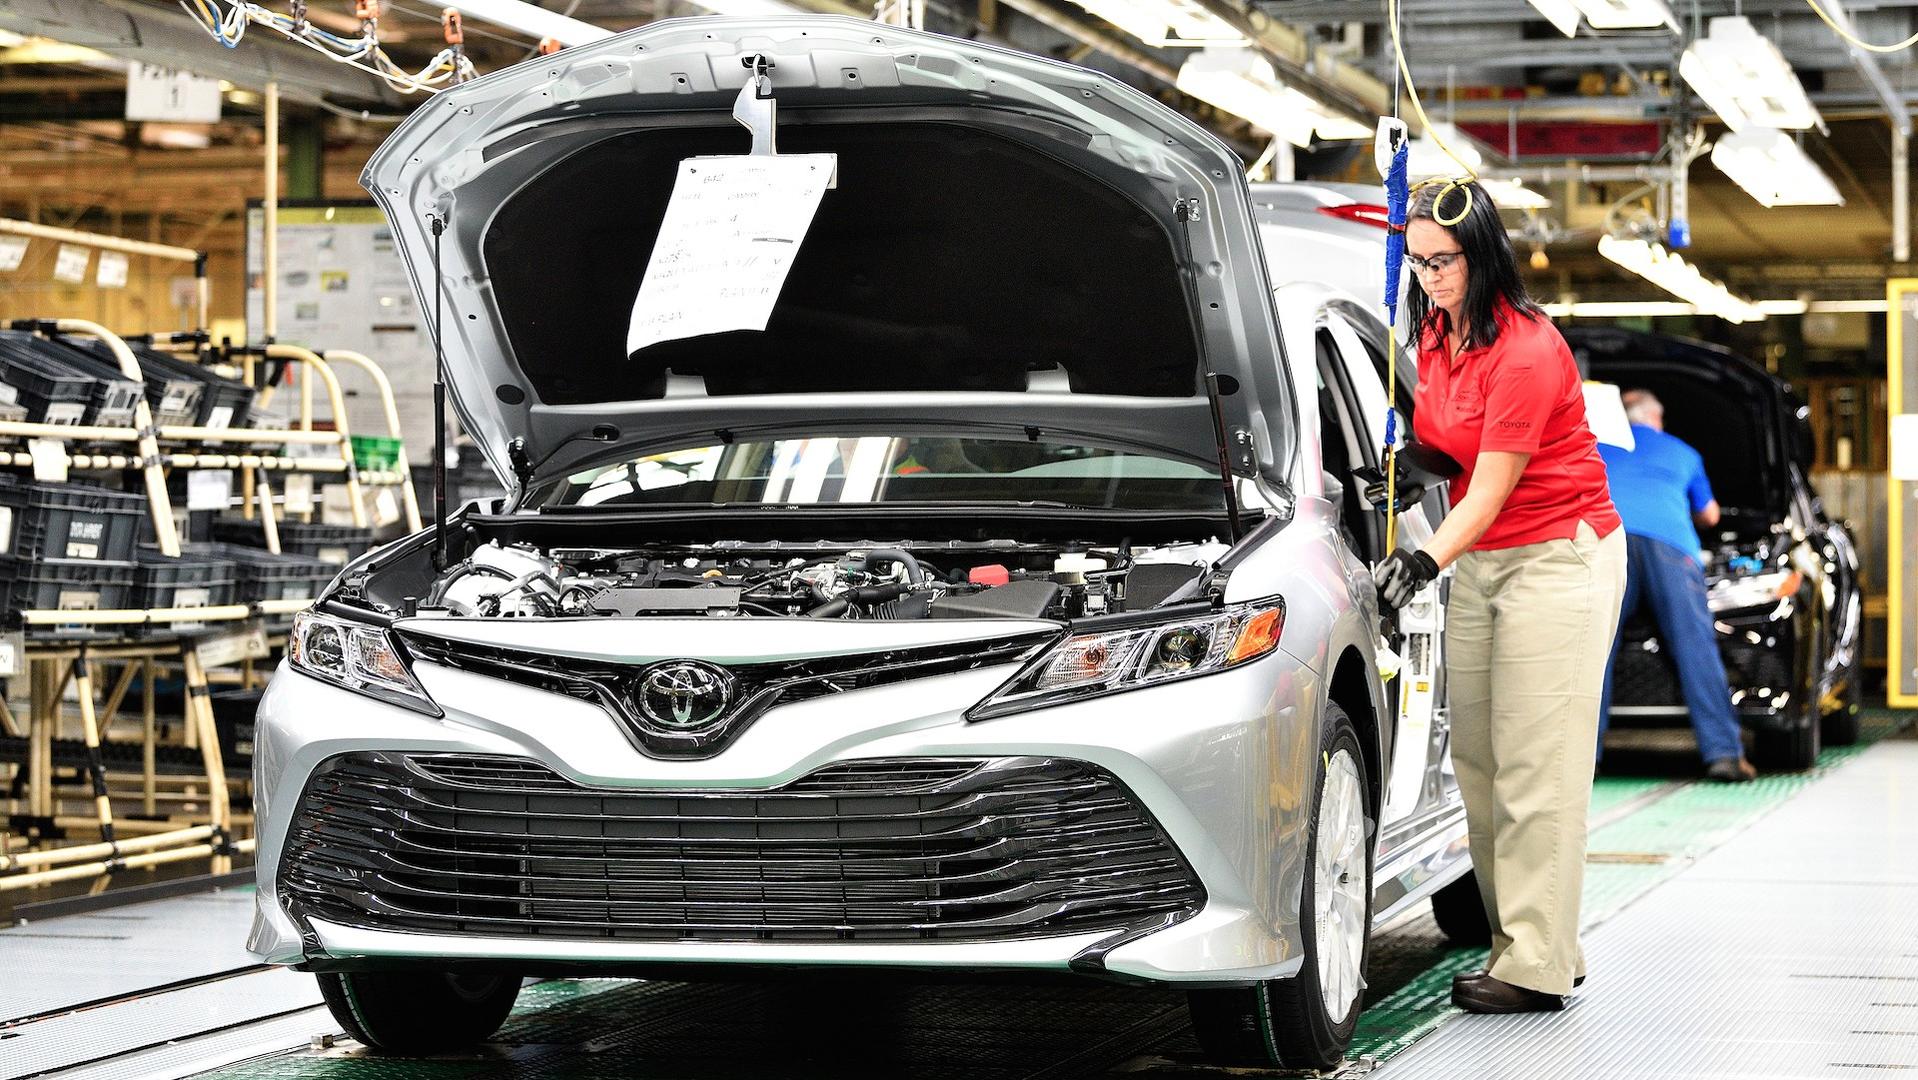 Catering to market trends Toyota plans to cut production in the United States